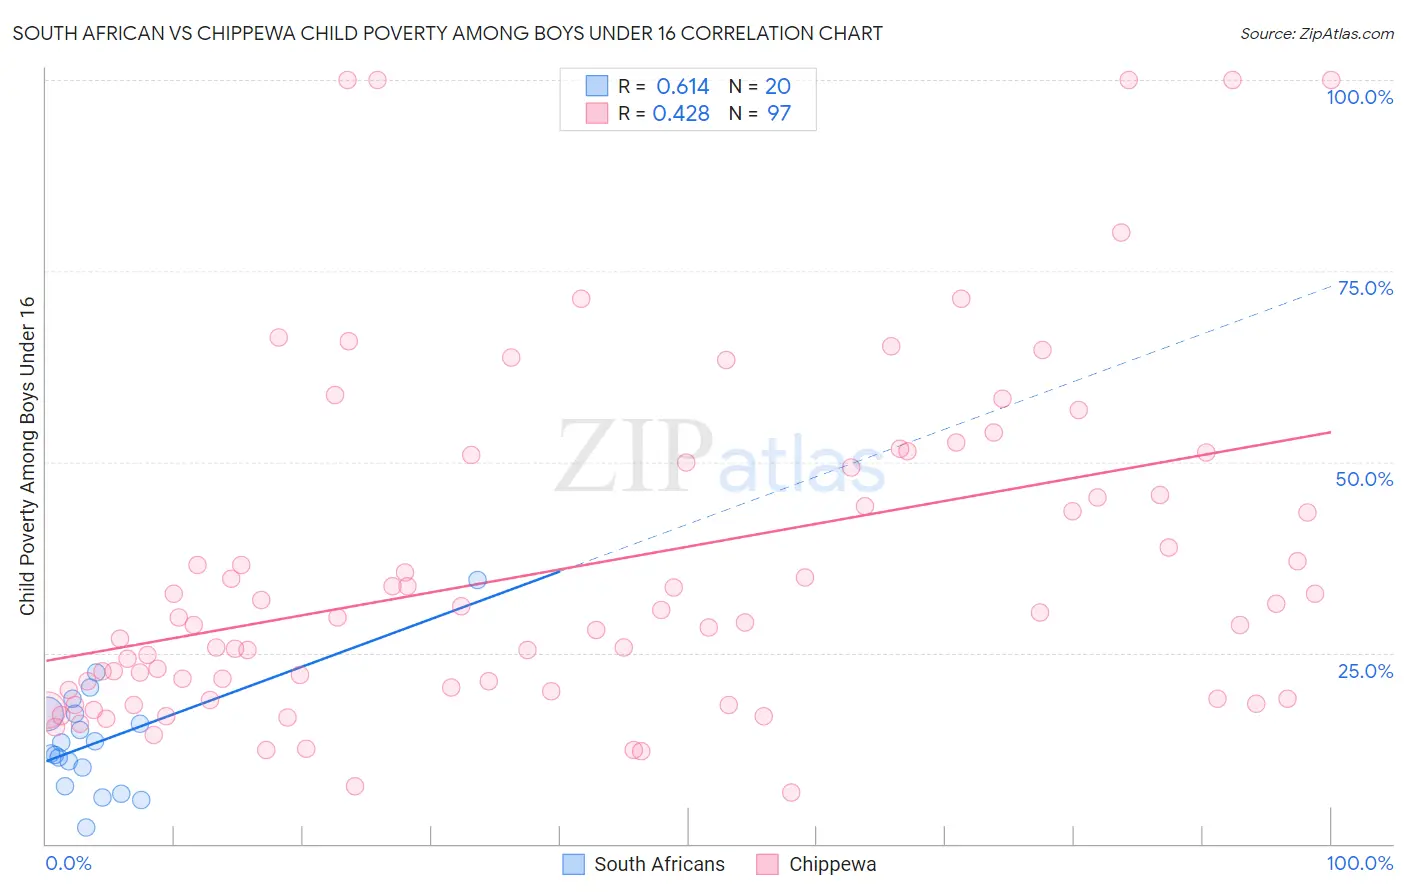 South African vs Chippewa Child Poverty Among Boys Under 16